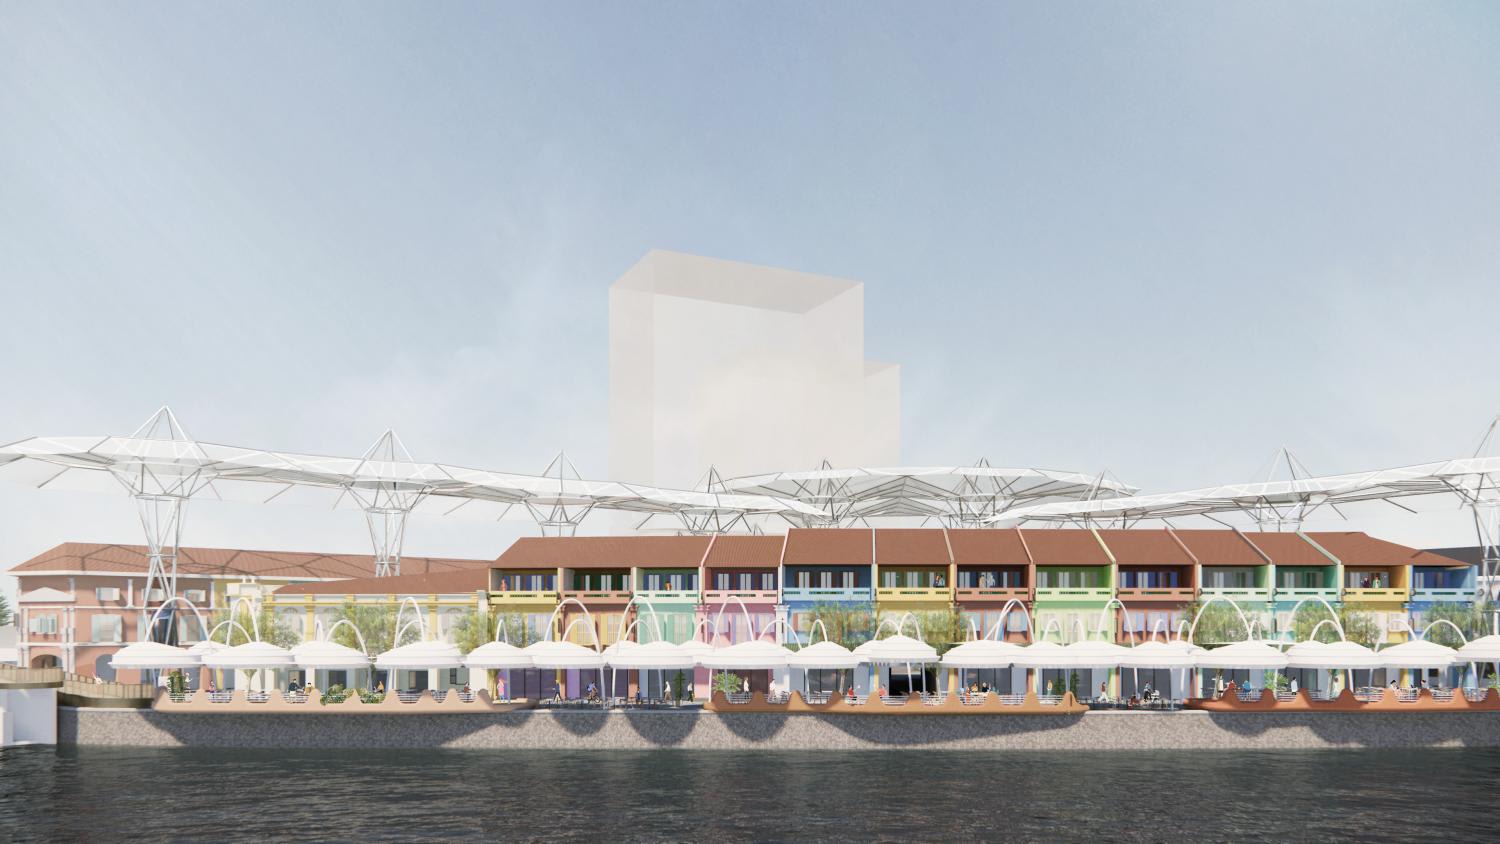 <p>An artist's impression of the revamped CQ@Clarke Quay as seen from the Singapore River.&nbsp;</p>
